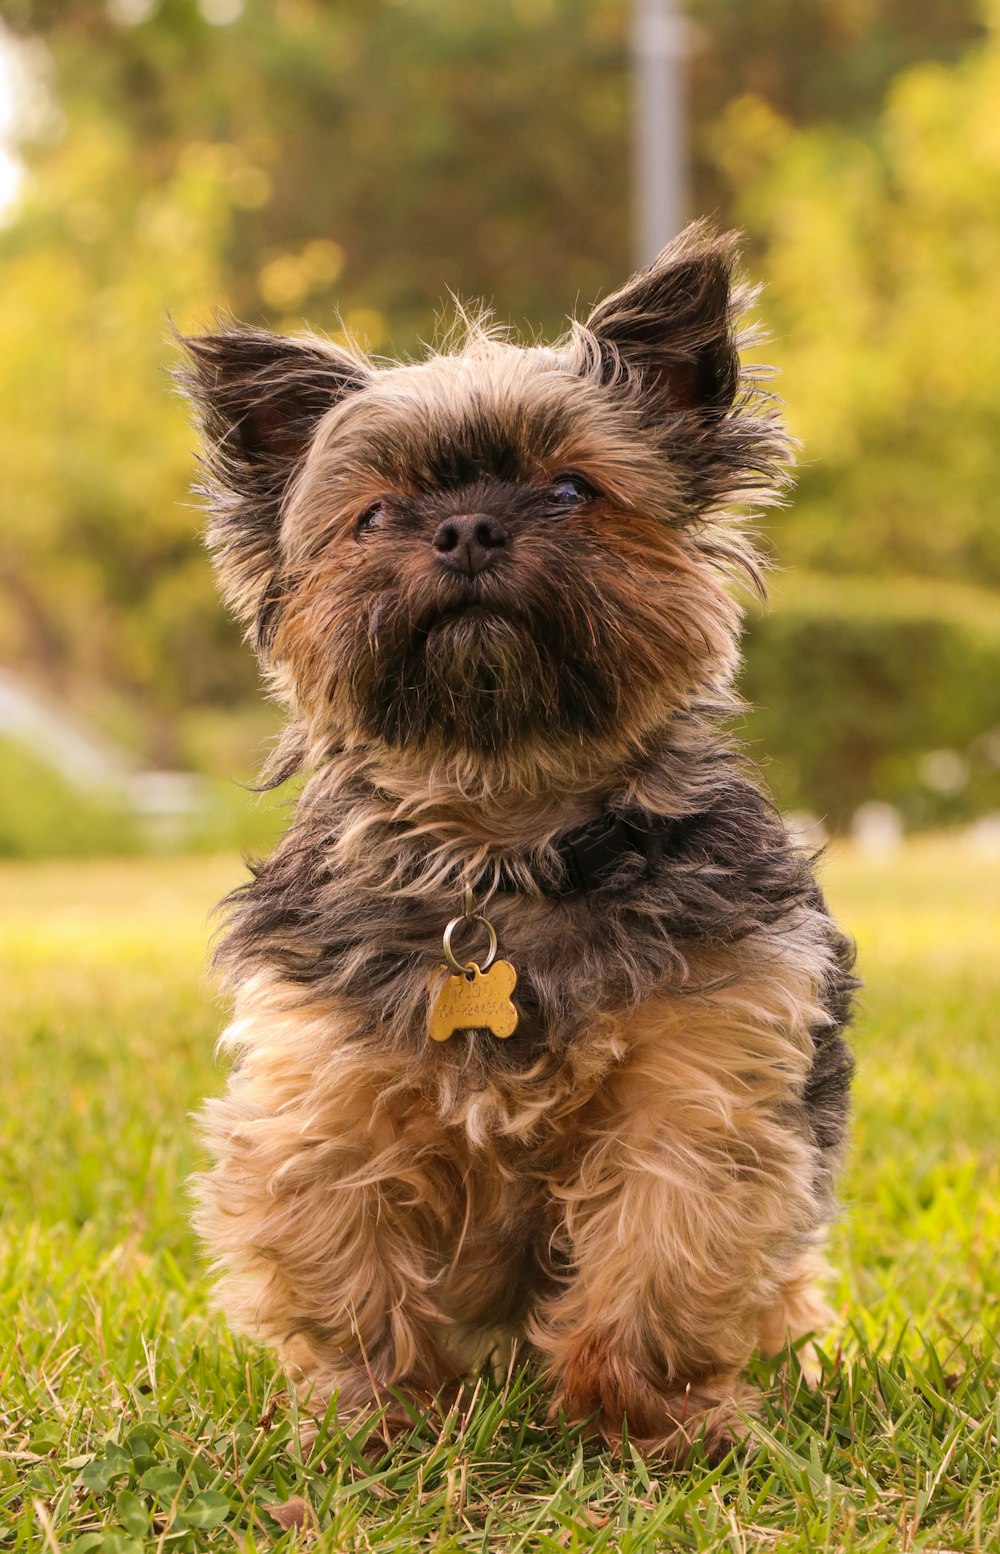 black and tan yorkshire terrier puppy on green grass field during daytime